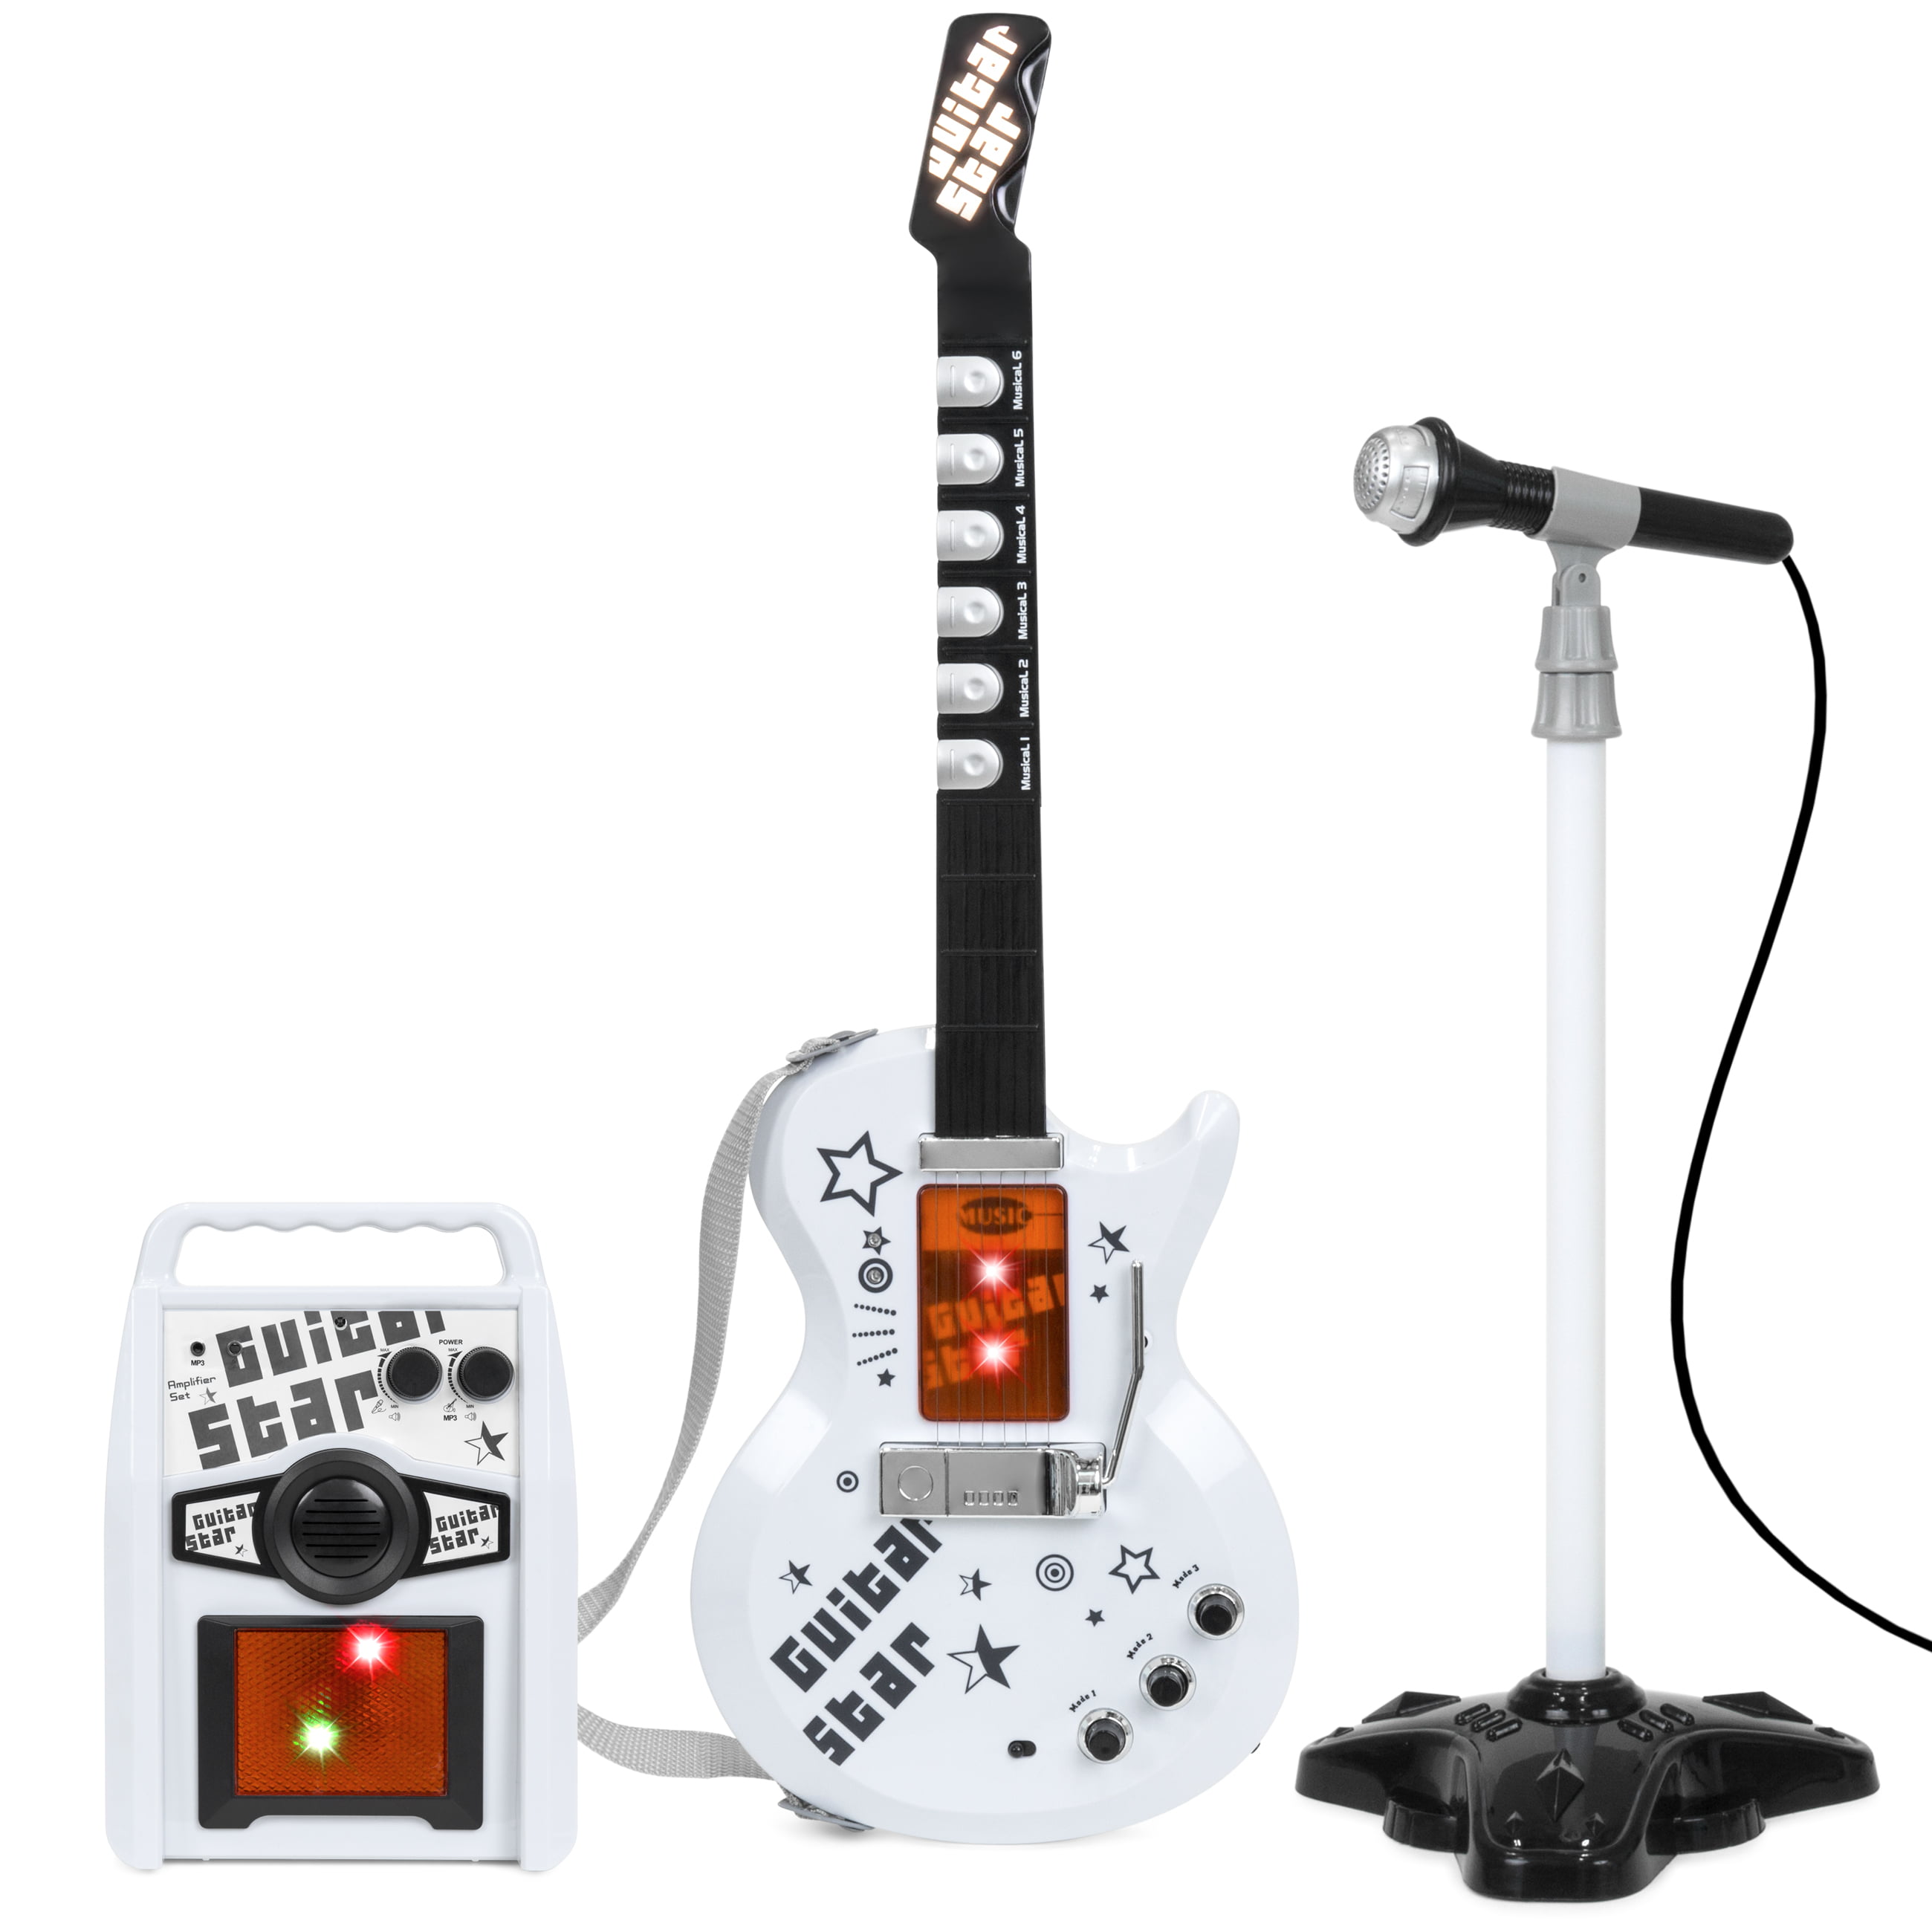 Kid Child Music Toy New Ultimate Spider-Man Guitar and Microphone Set 